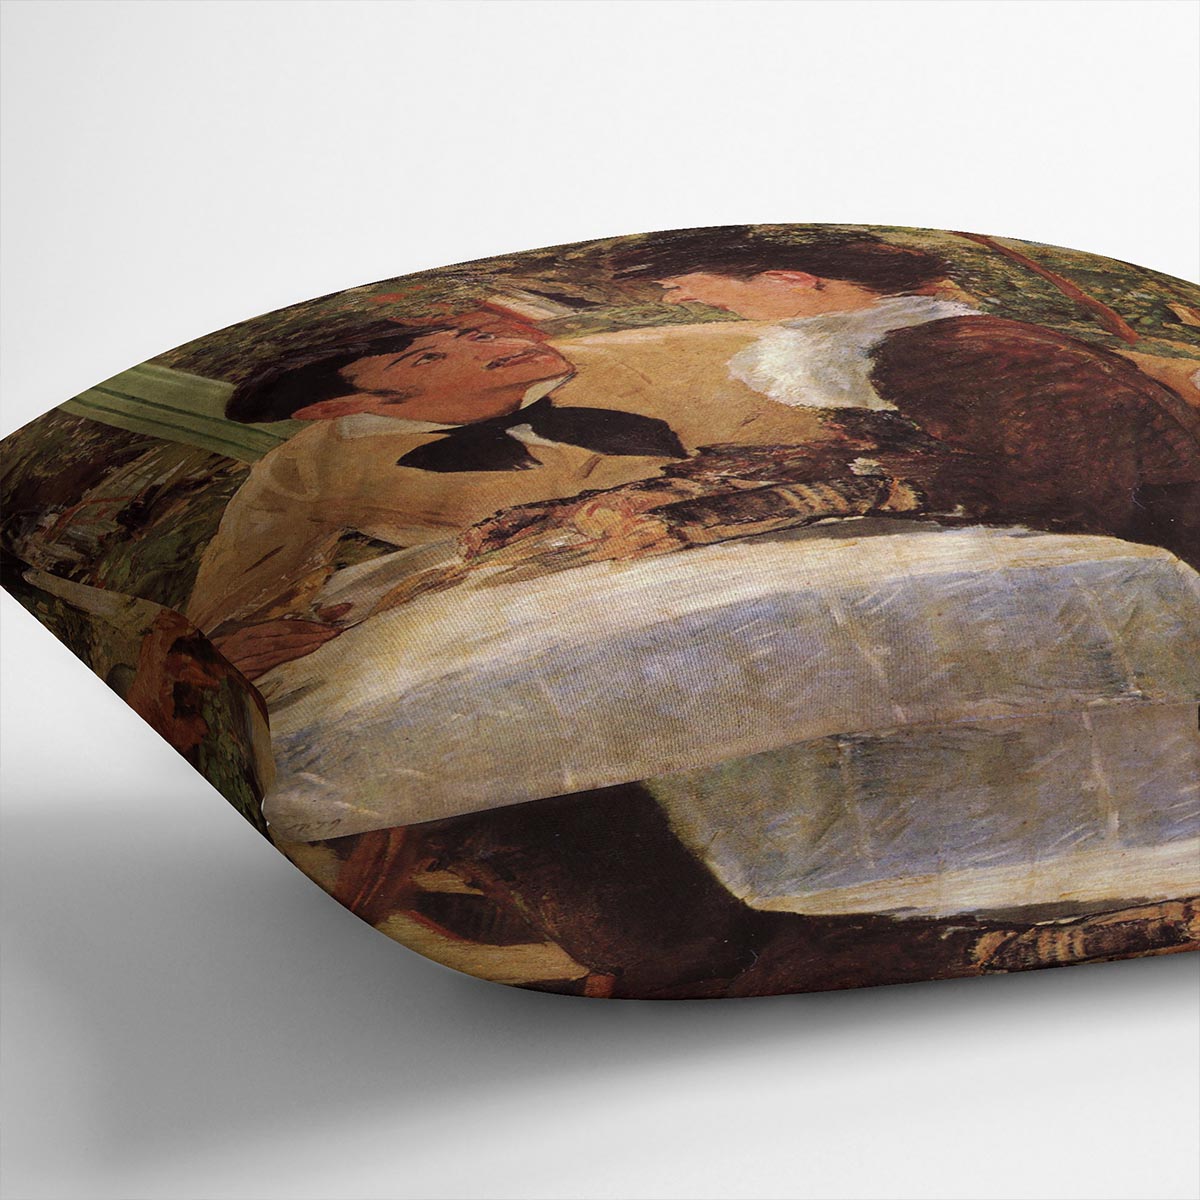 Pare Lathuille by Manet Cushion